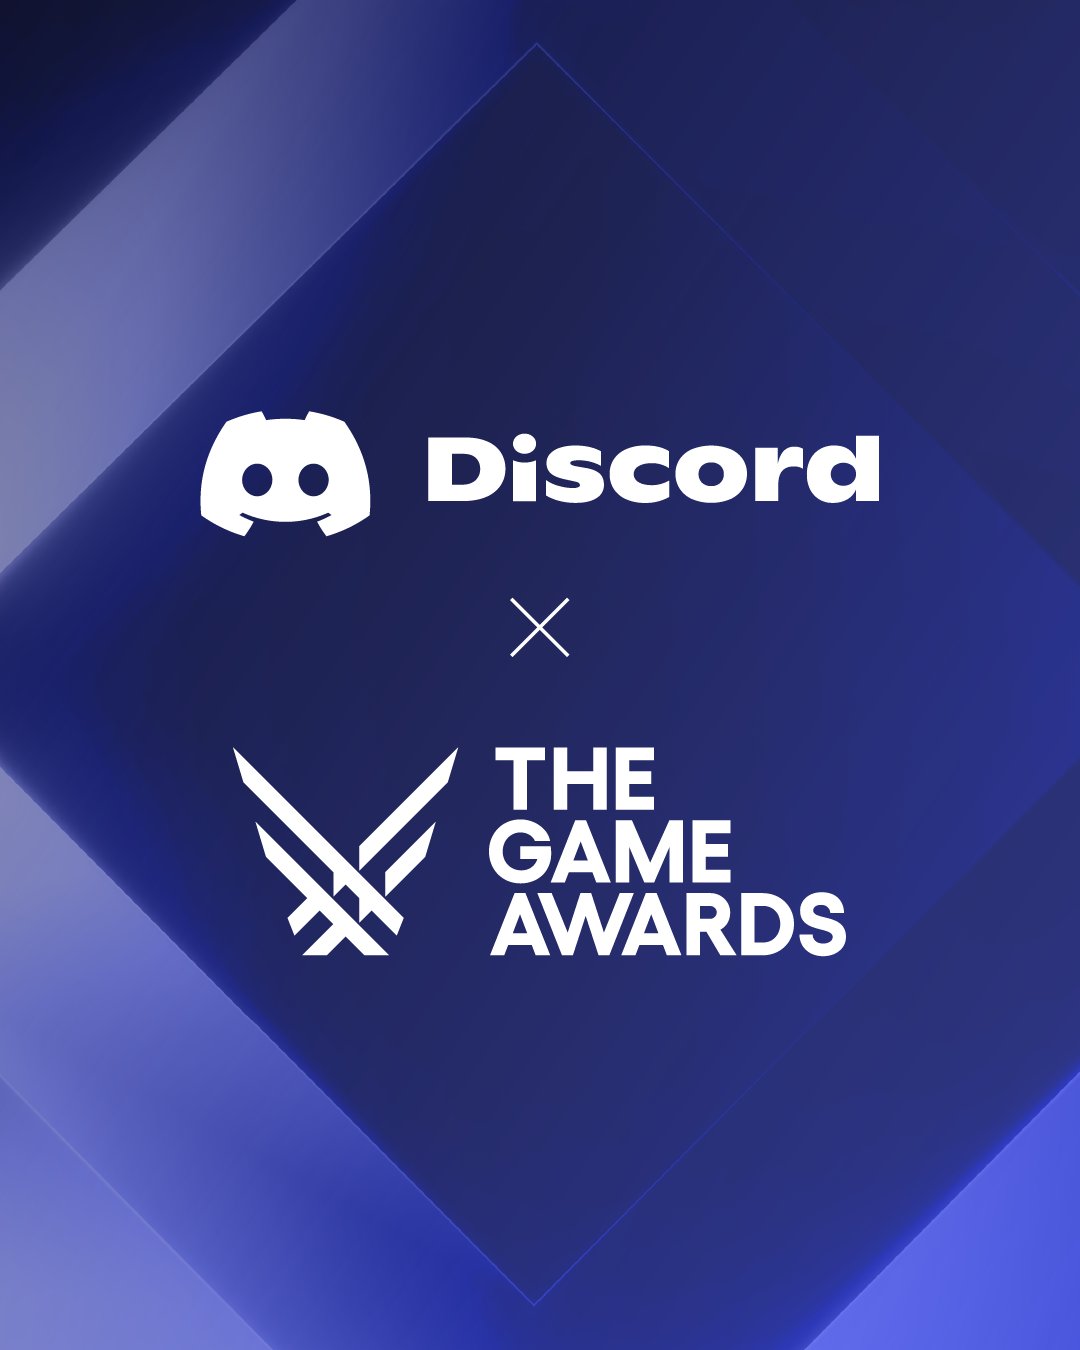 The Epic Games Store at The Game Awards 2019 - Epic Games Store